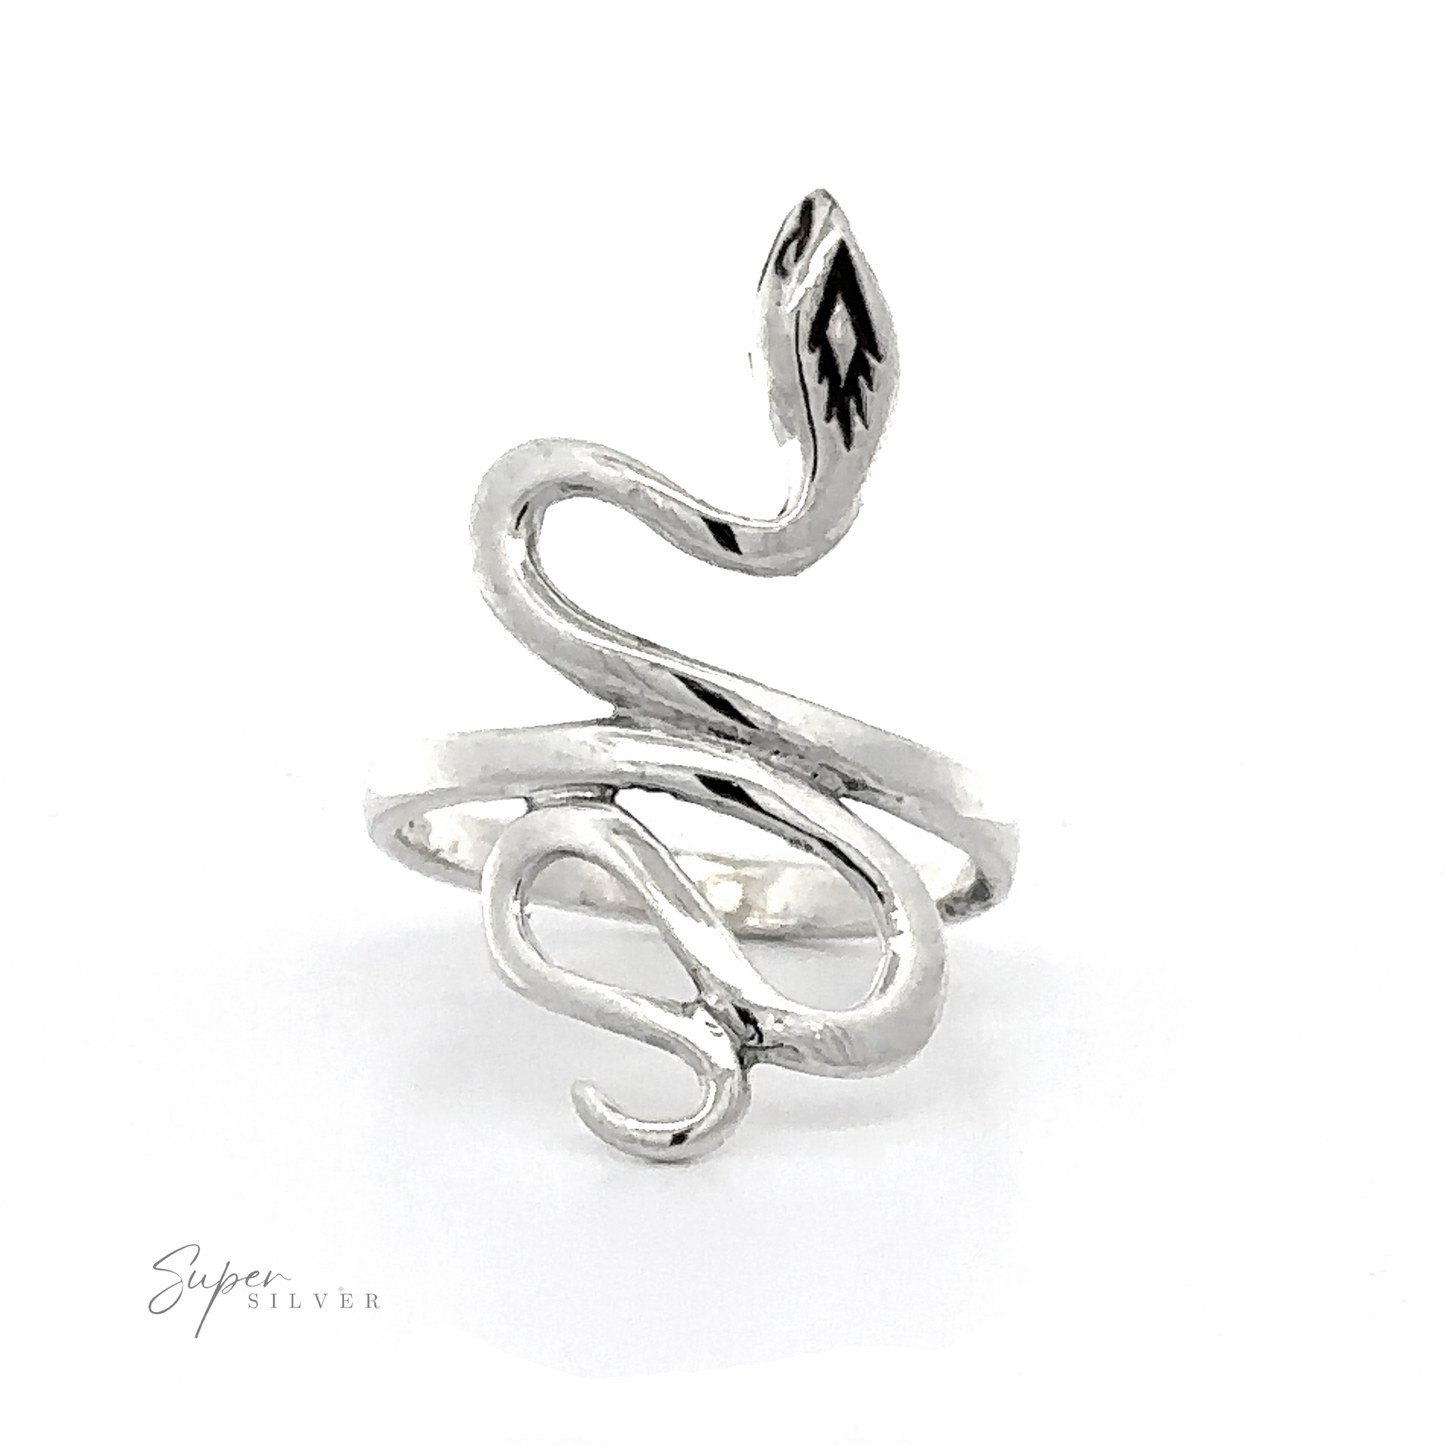 A Coiled Snake Ring With Fine Finish with a polished finish, showcasing an intricate, twisty design and subtle engravings at one end.